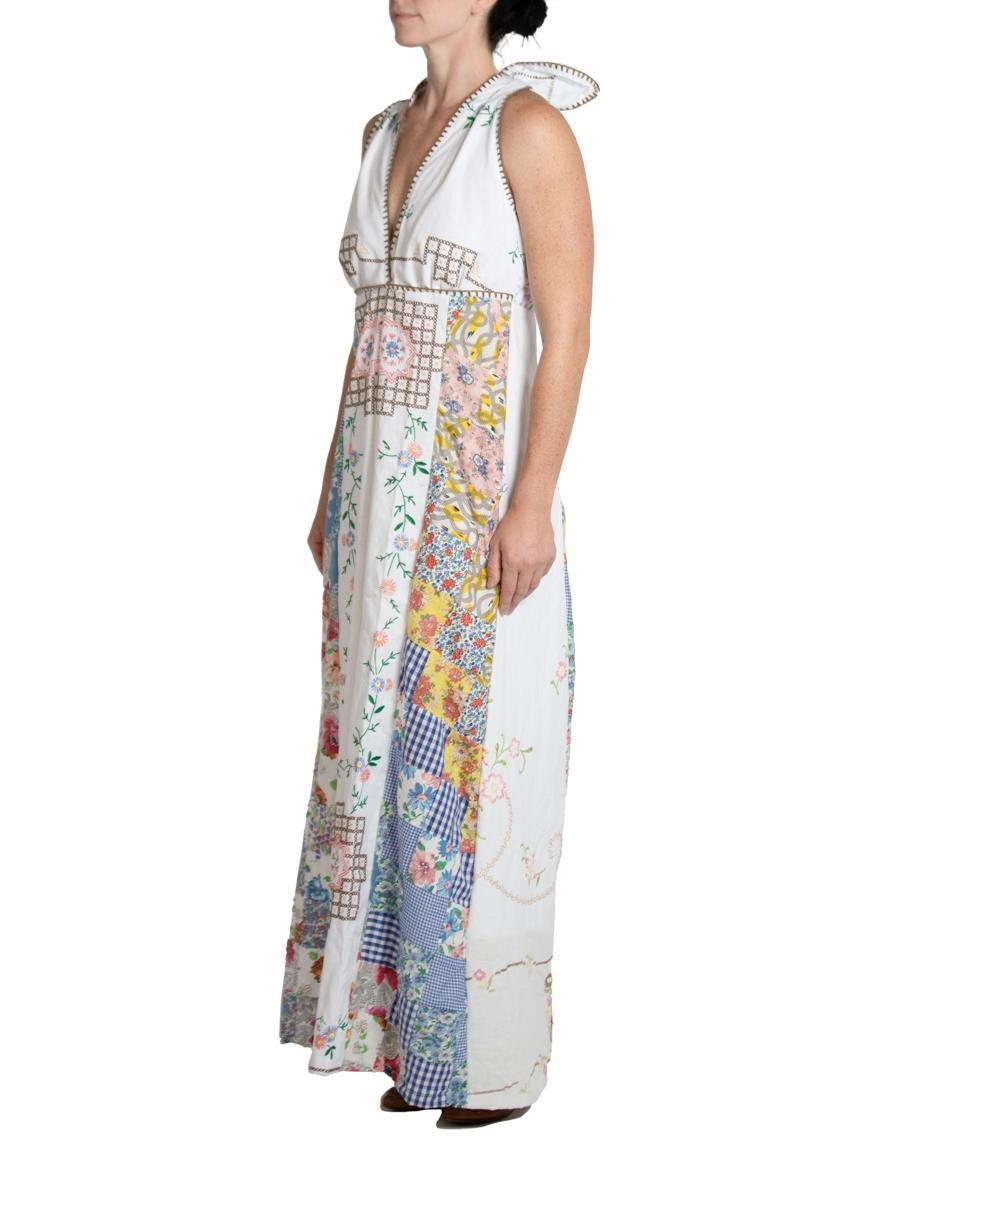 Fits M/L Morphew Collection White & Blue Organic Cotton Hand Embroidered Jumpsuit 
MORPHEW COLLECTION is made entirely by hand in our NYC Ateliér of rare antique materials sourced from around the globe. Our sustainable vintage materials represent